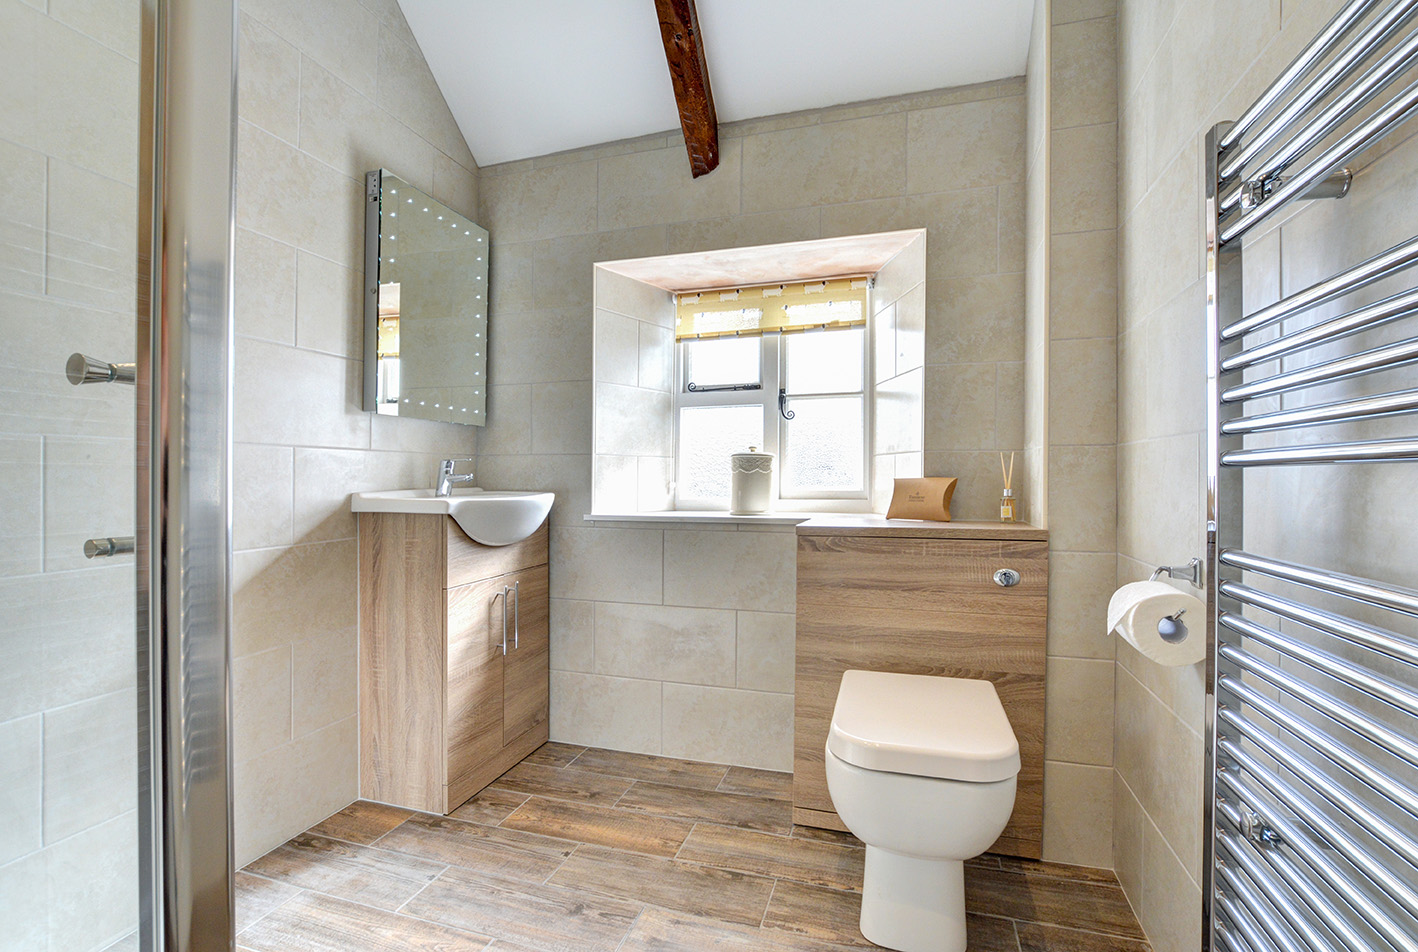 The bathroom of Otterbridge luxury self catering converted barn holiday cottage at Penrose Burden in North Cornwall01.jpg